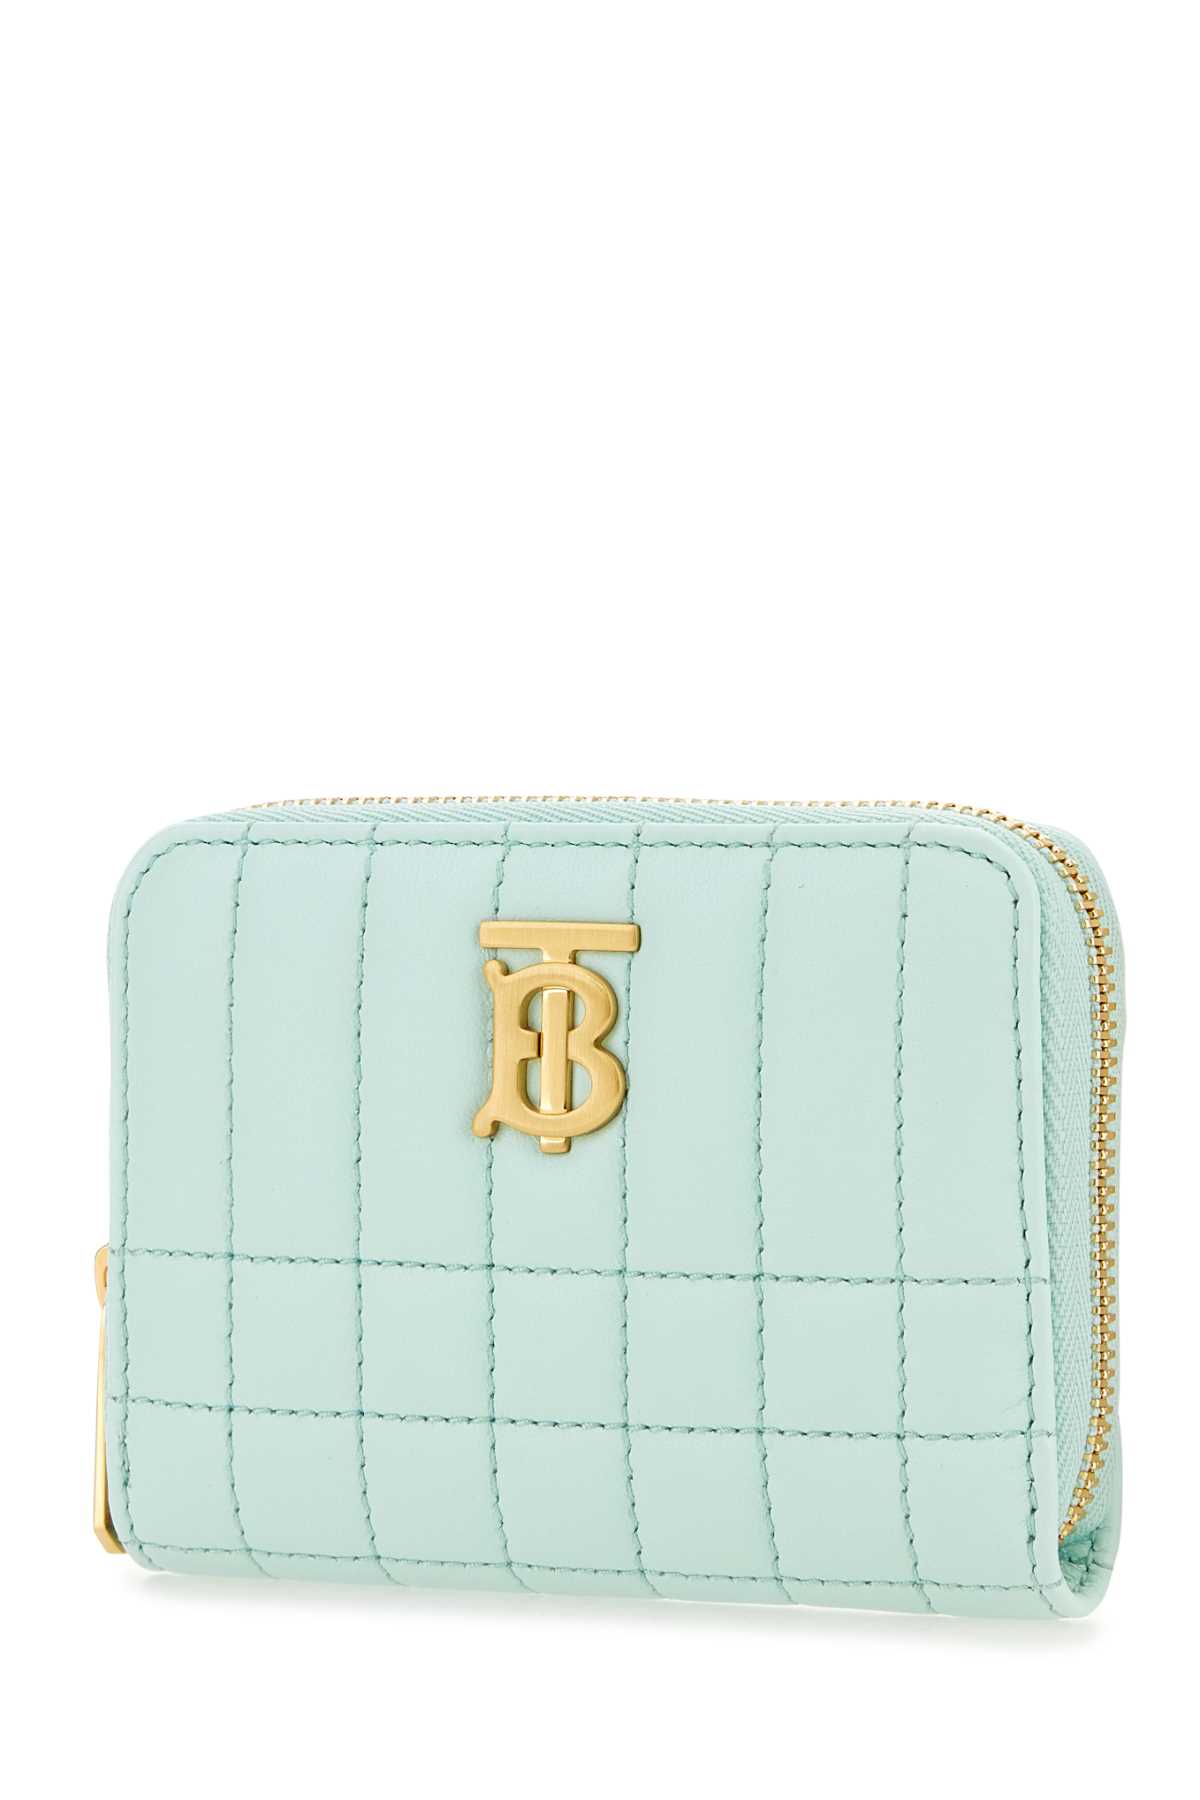 Burberry Pastel Light-blue Nappa Leather Lola Wallet In Coolmint